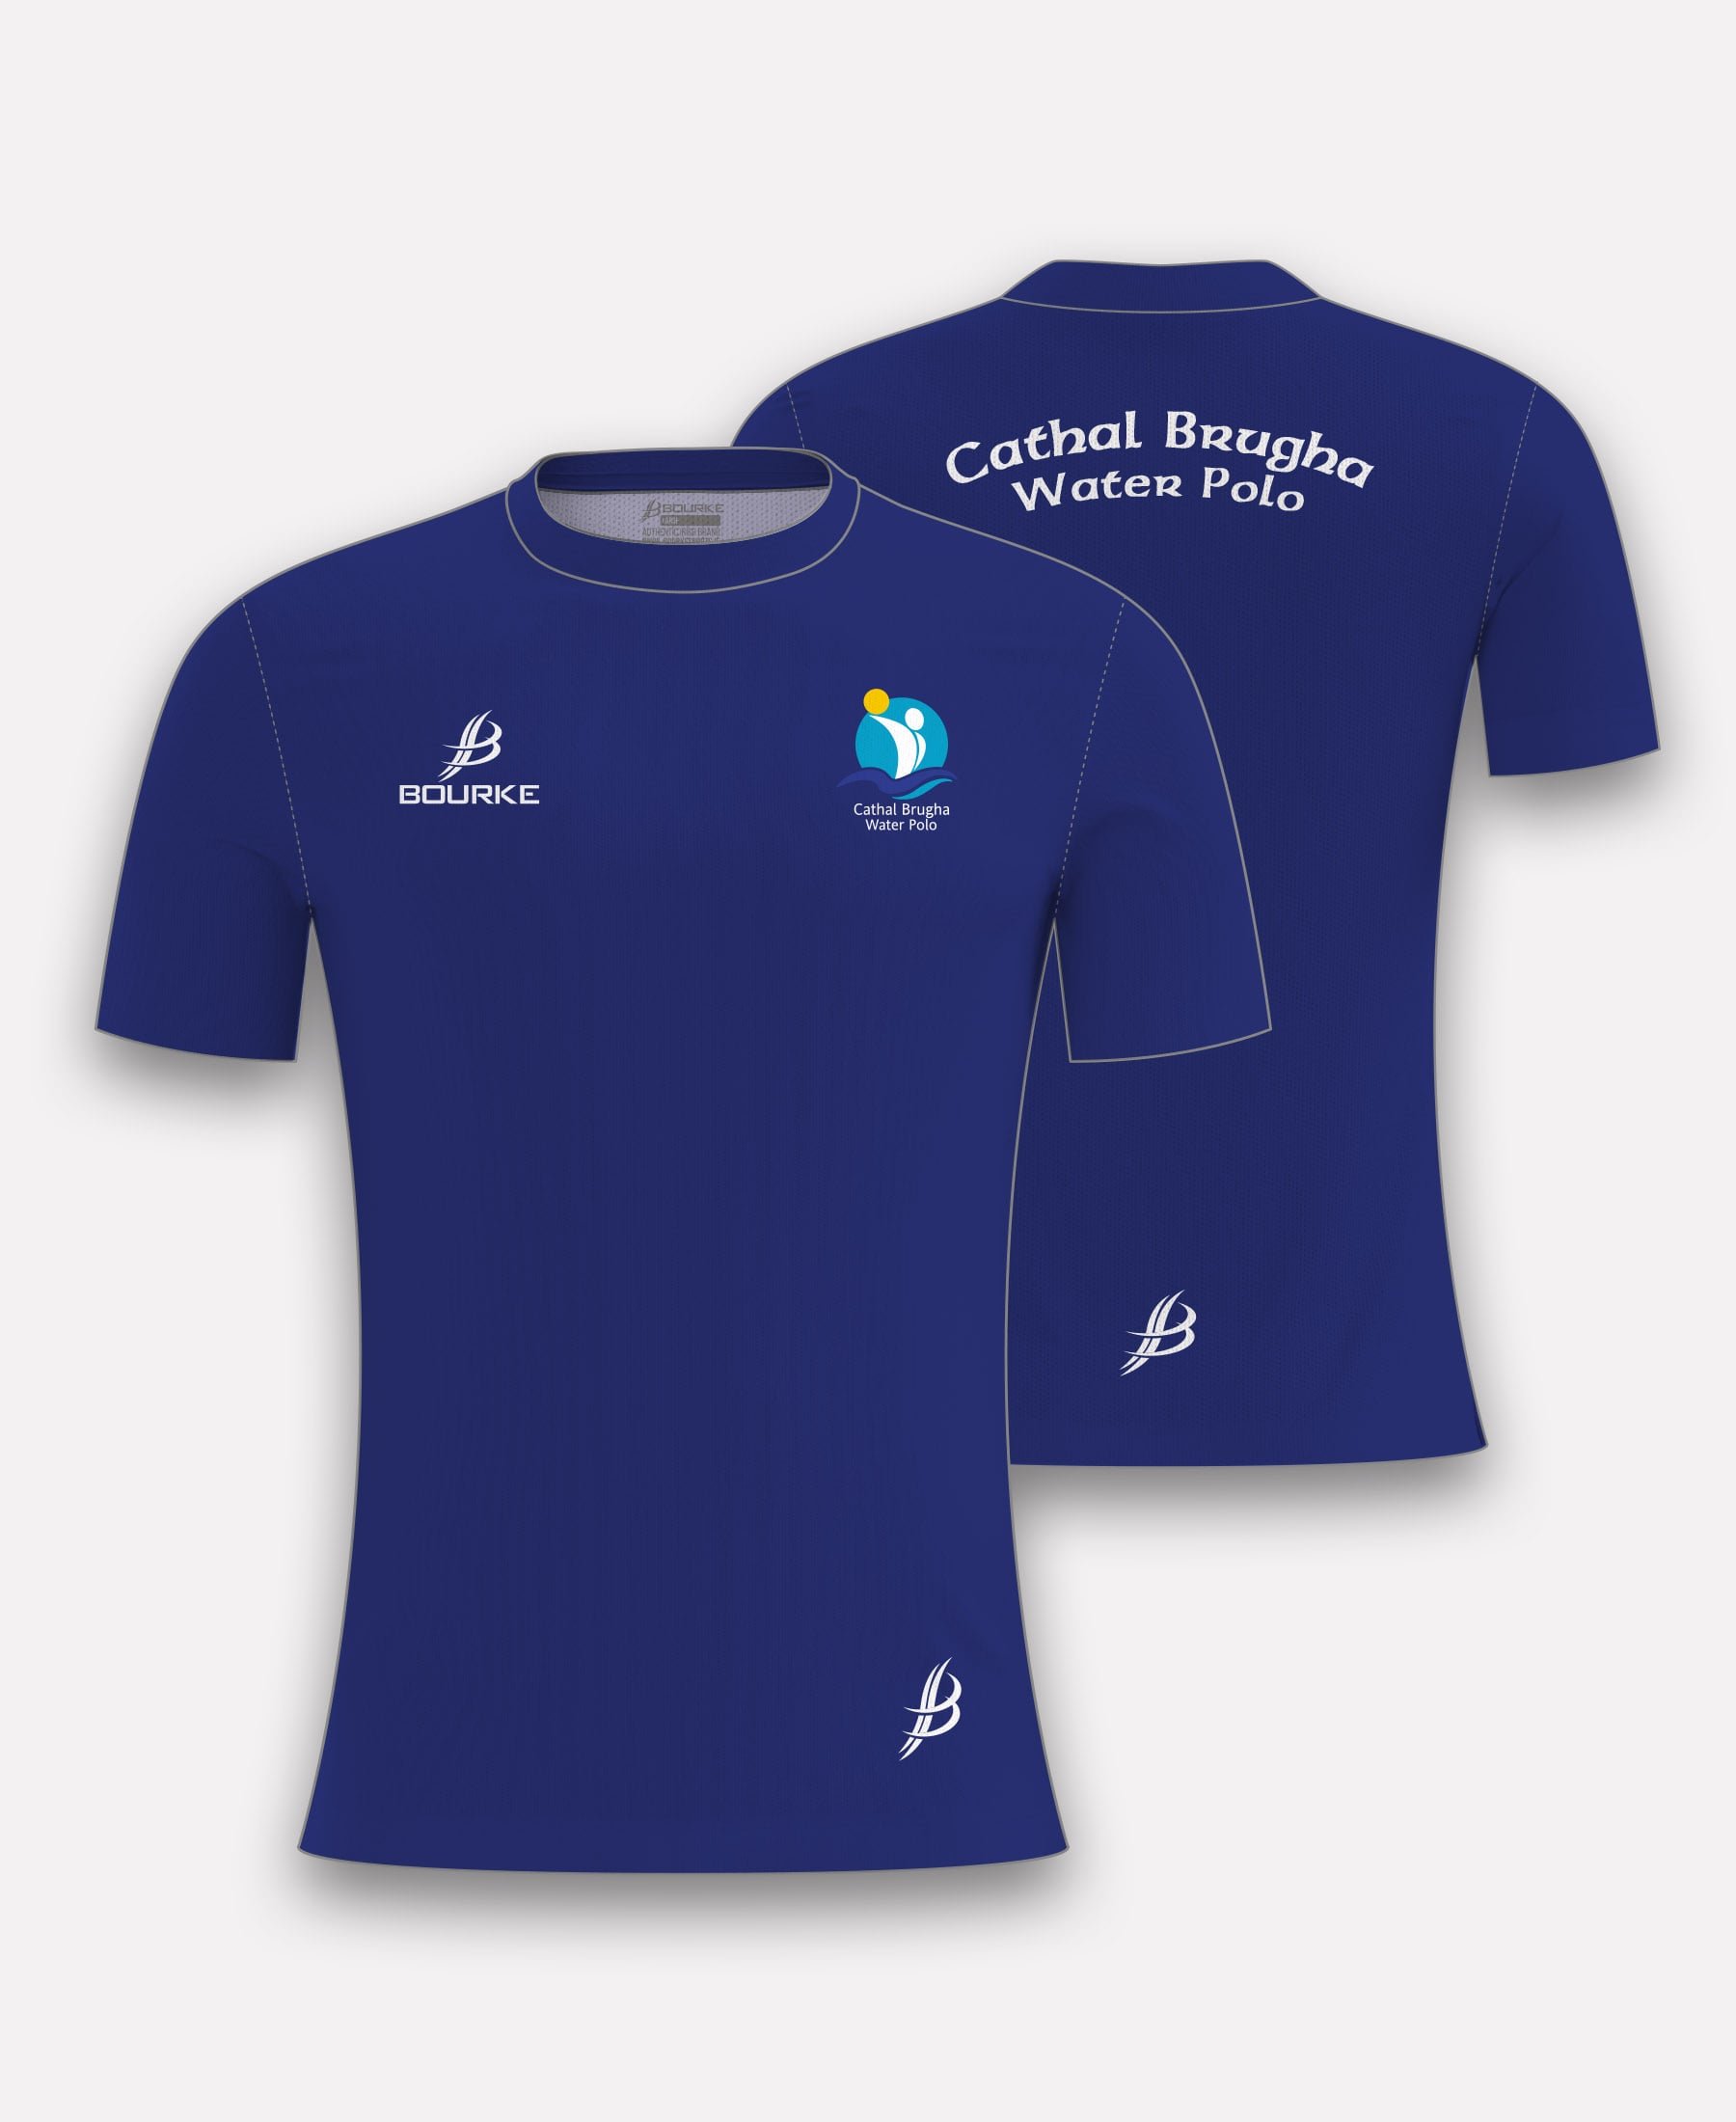 Cathal Brugha Water Polo Jersey